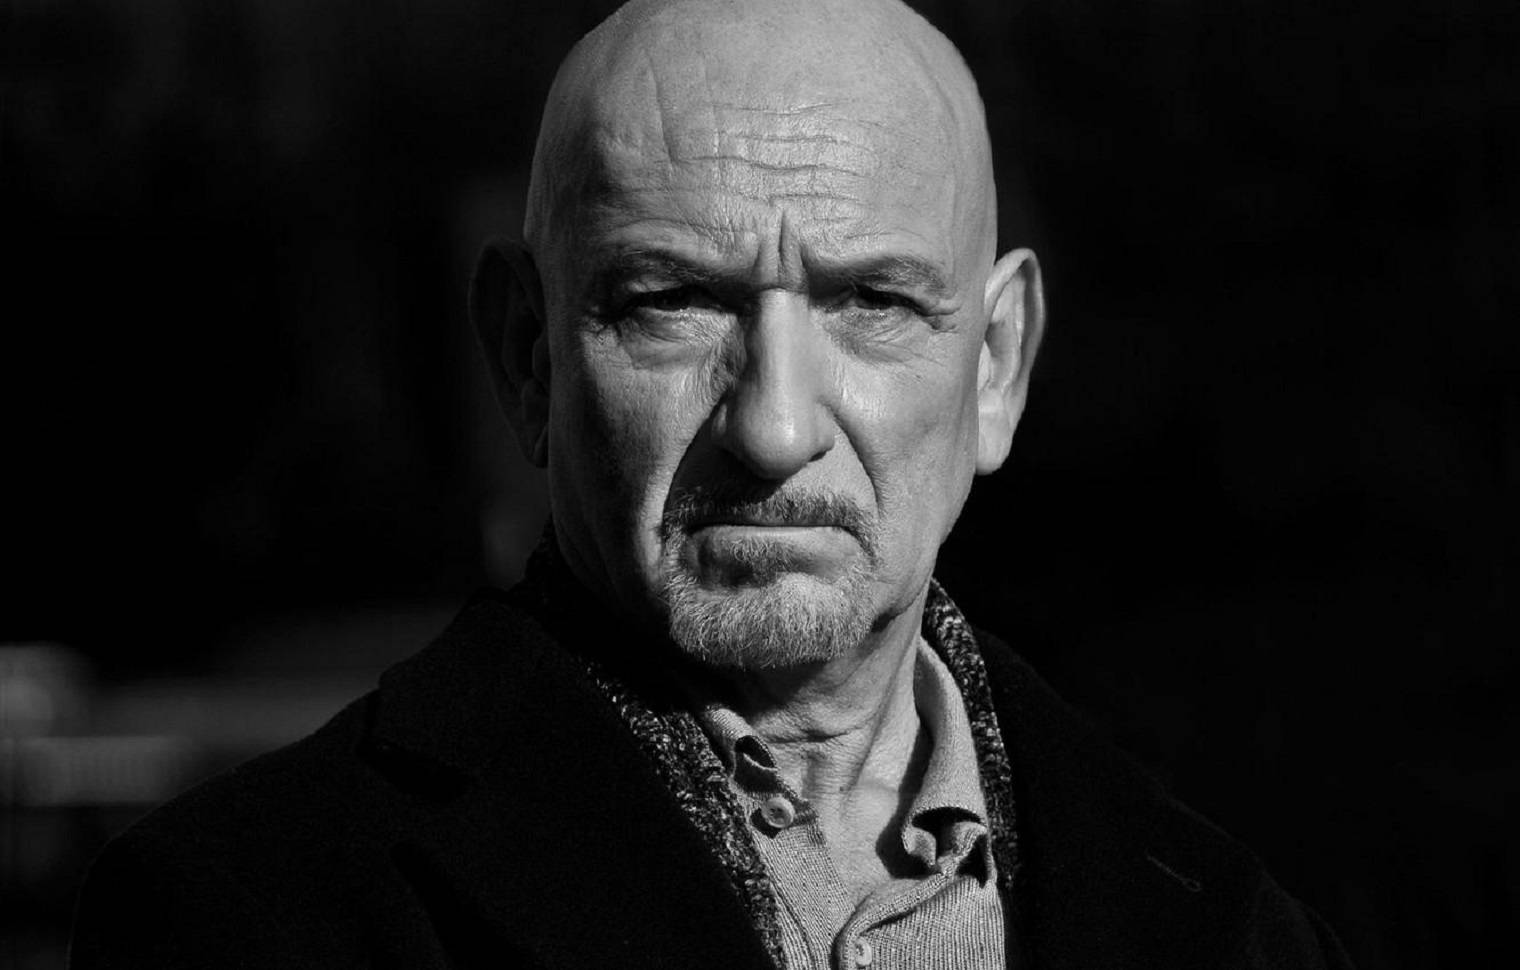 Free Ben Kingsley Pictures , [100+] Ben Kingsley Pictures for FREE |  